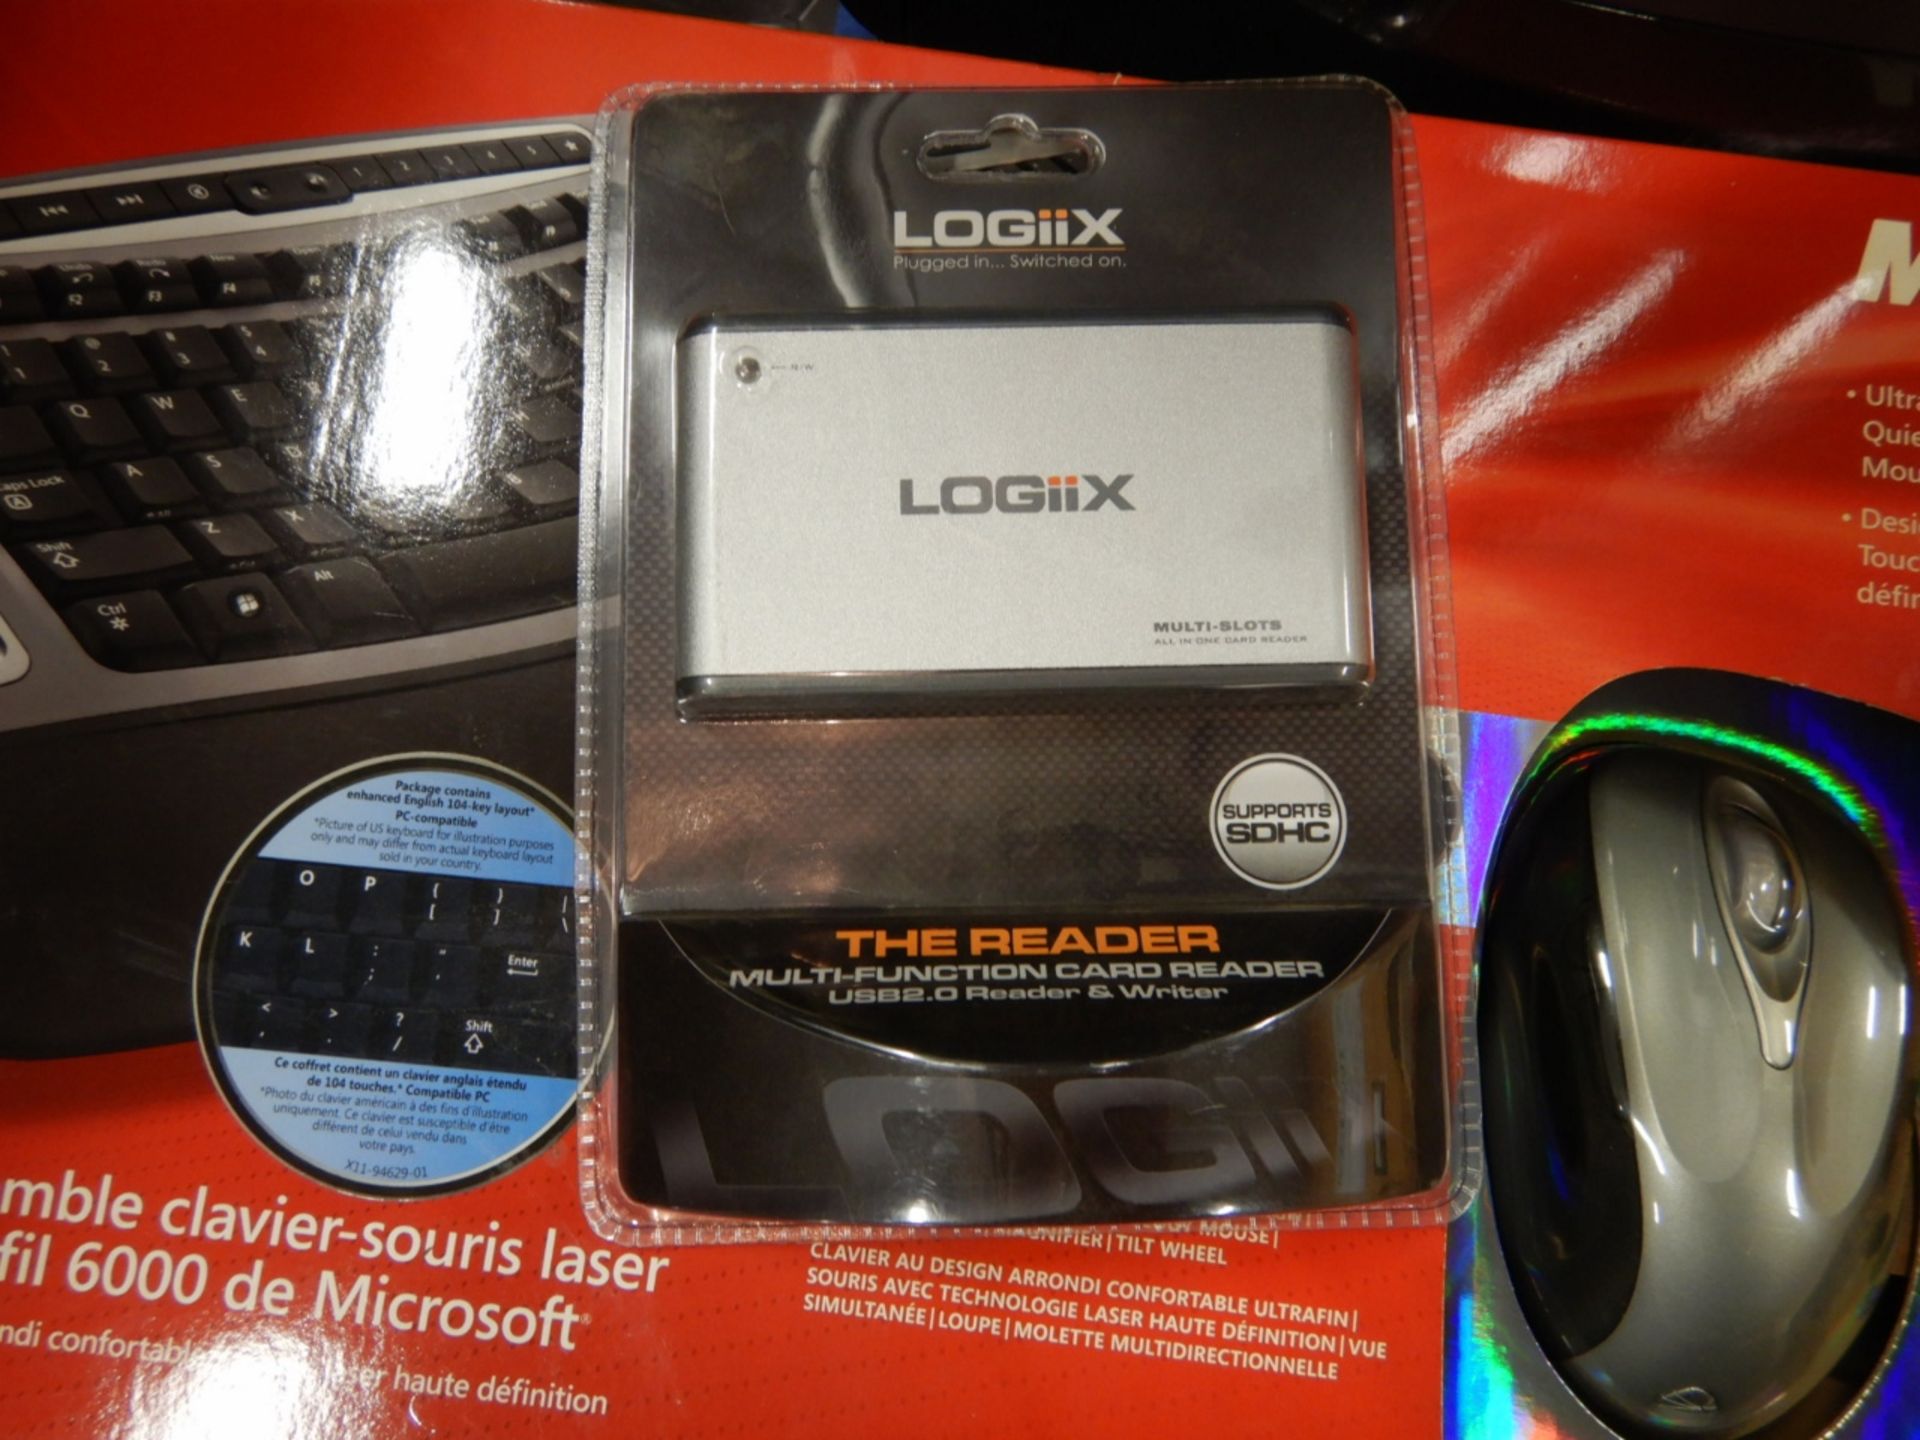 MICROSOFT ULTRA THIN CURVED KEYBOARD AND MOUSE (NEW IN BOX), LOGIIX MULTI-FUNCTION CARD READER, - Image 4 of 6